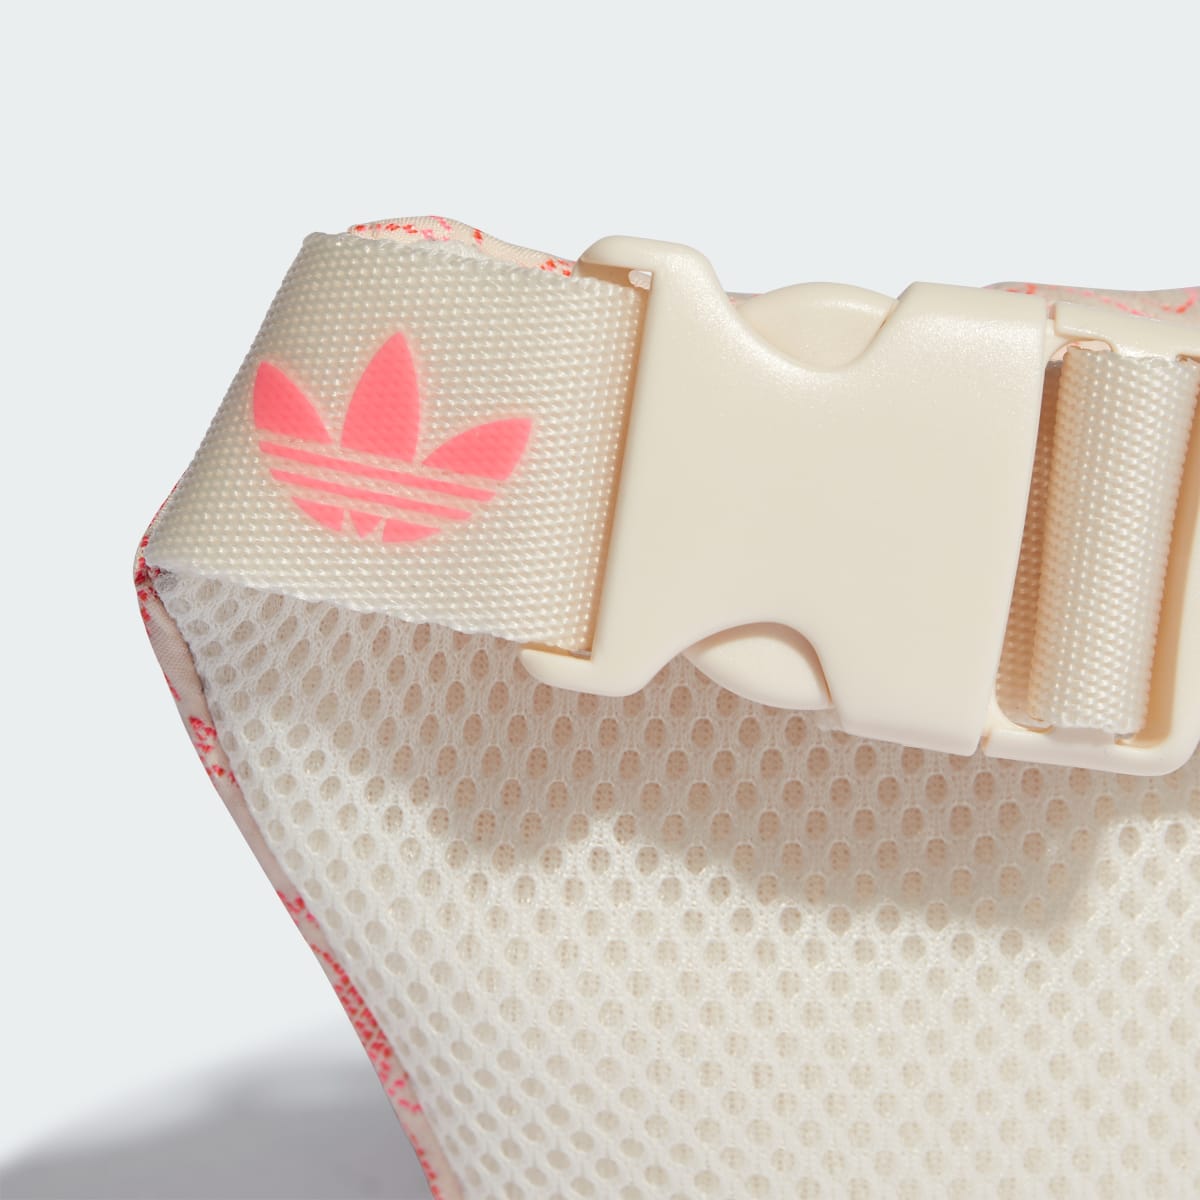 Adidas Quilted Trefoil Waist Bag. 7